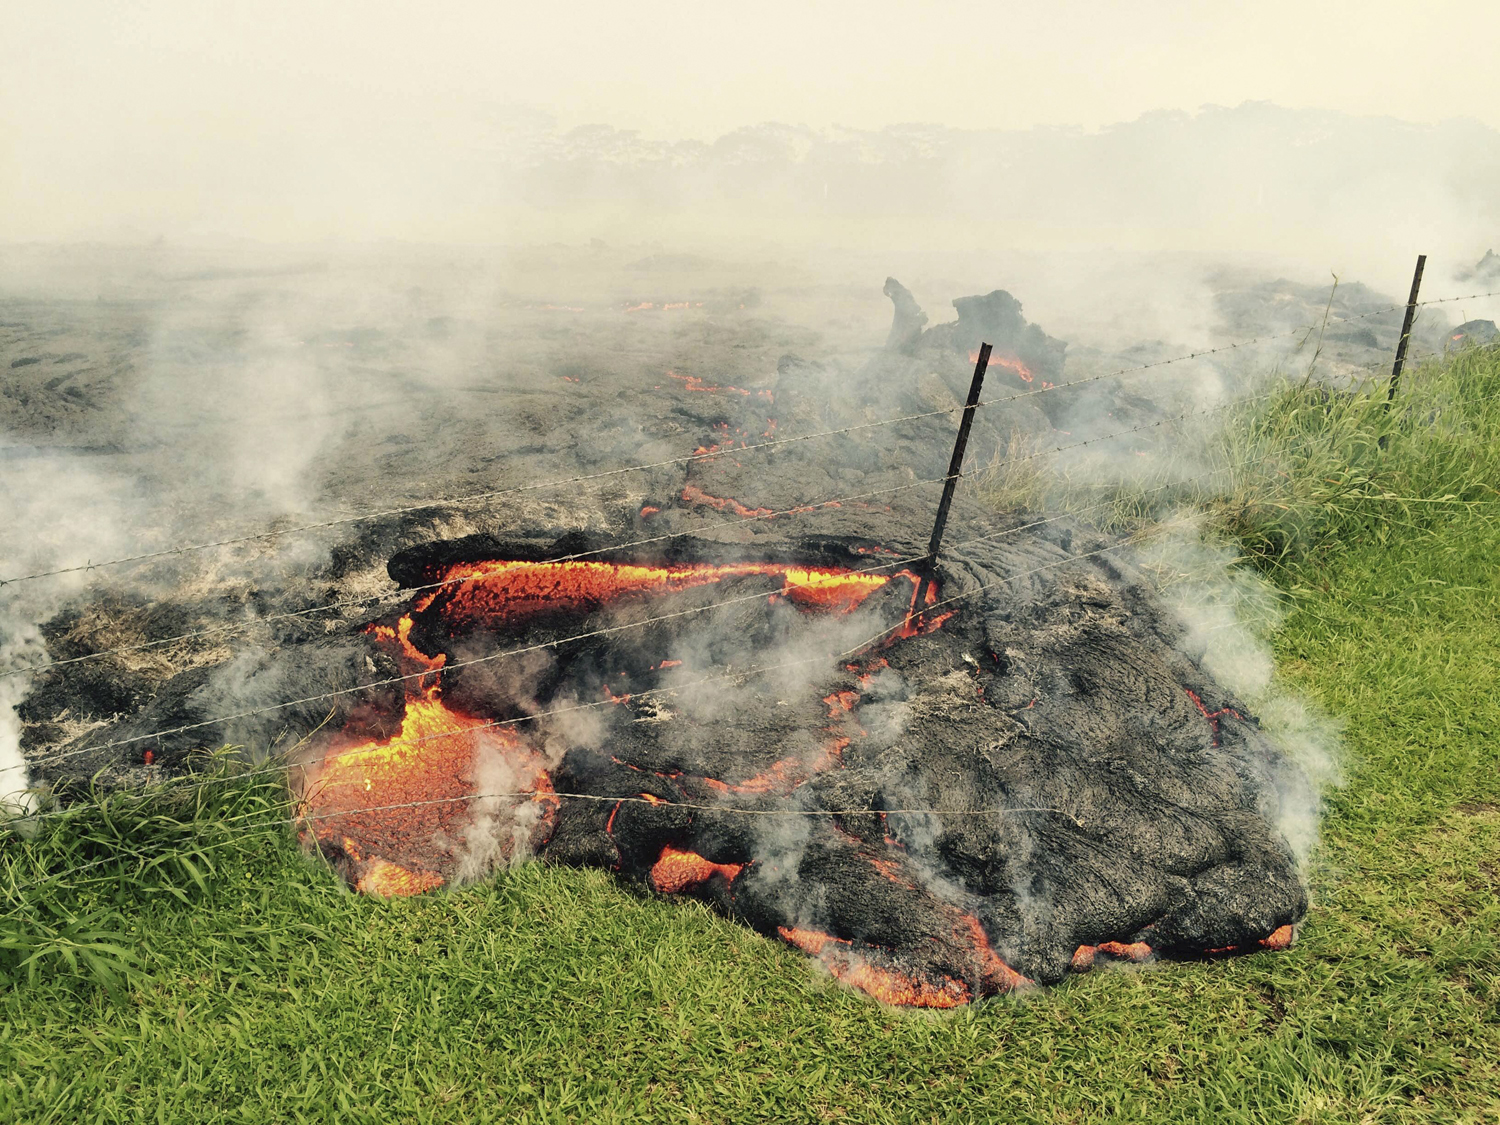 The lava flow from the Kilauea Volcano is seen advancing across a pasture near the village of Pahoa, Hawaii